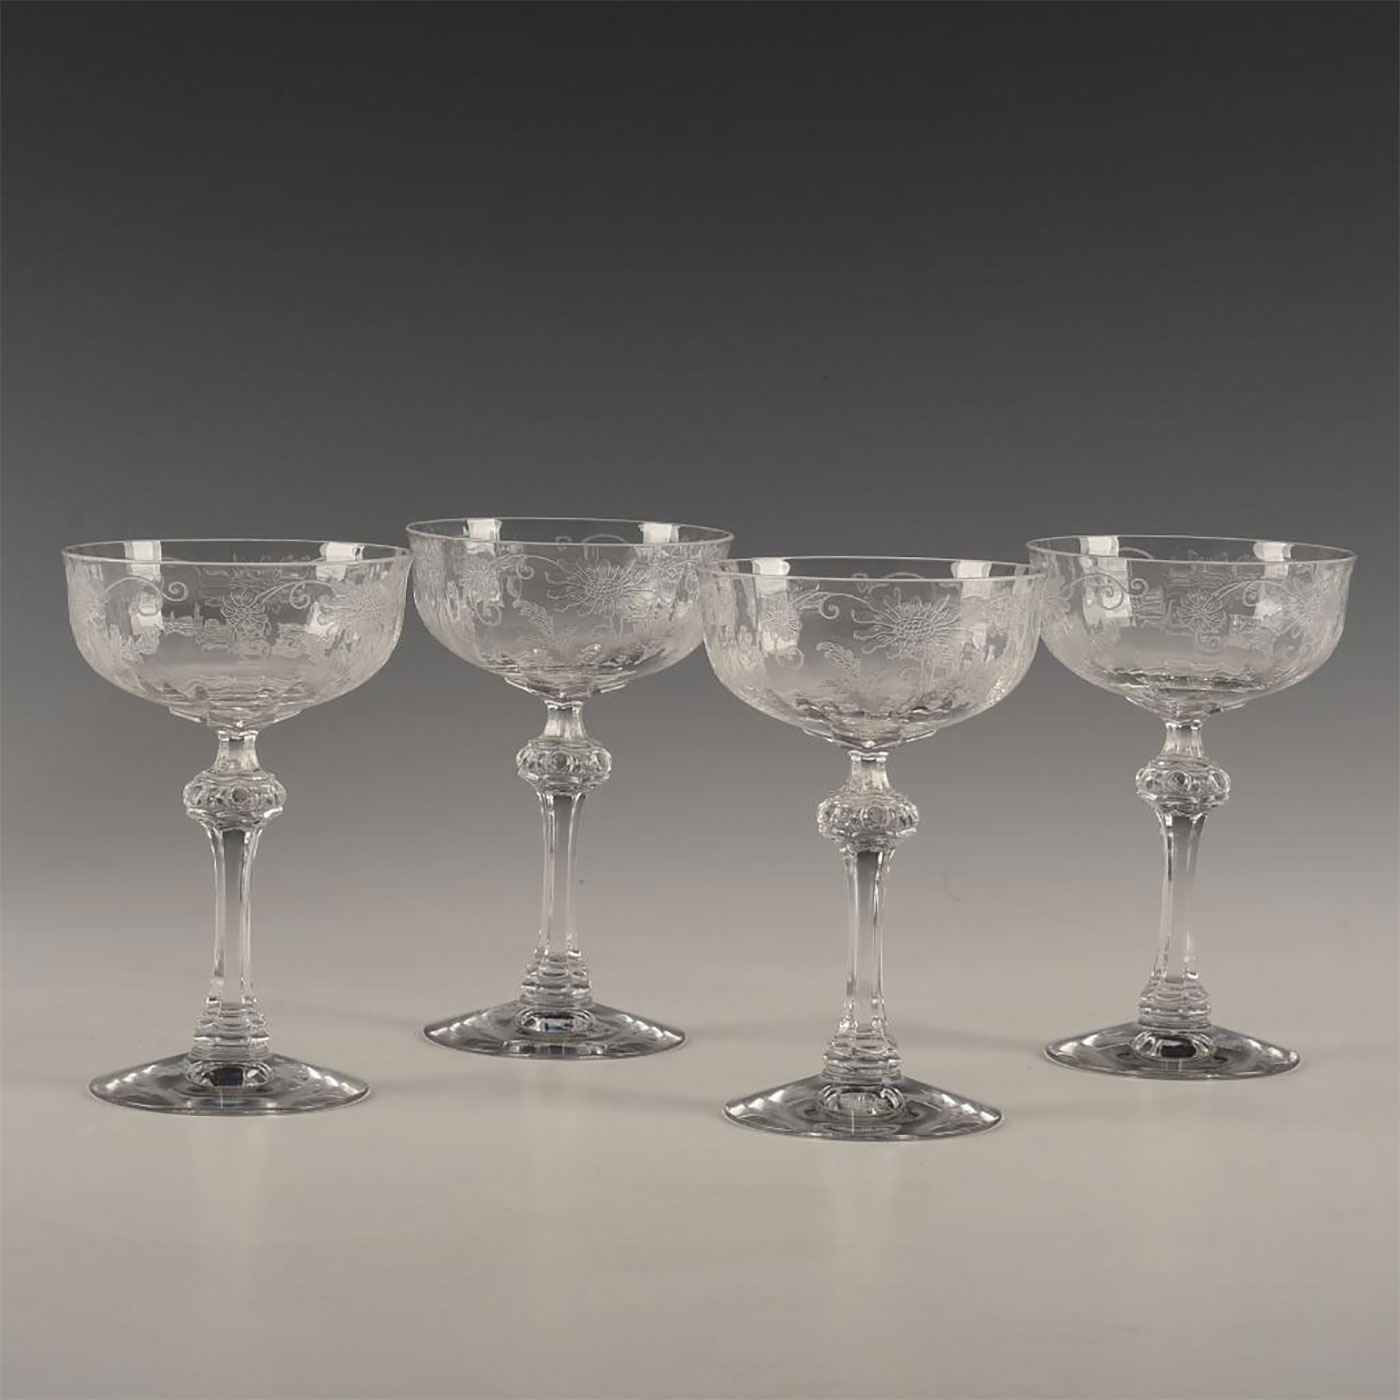 SET OF 5 WINE GLASSES, 4 GOBLETS, AND DUCK AERATOR - Image 6 of 9